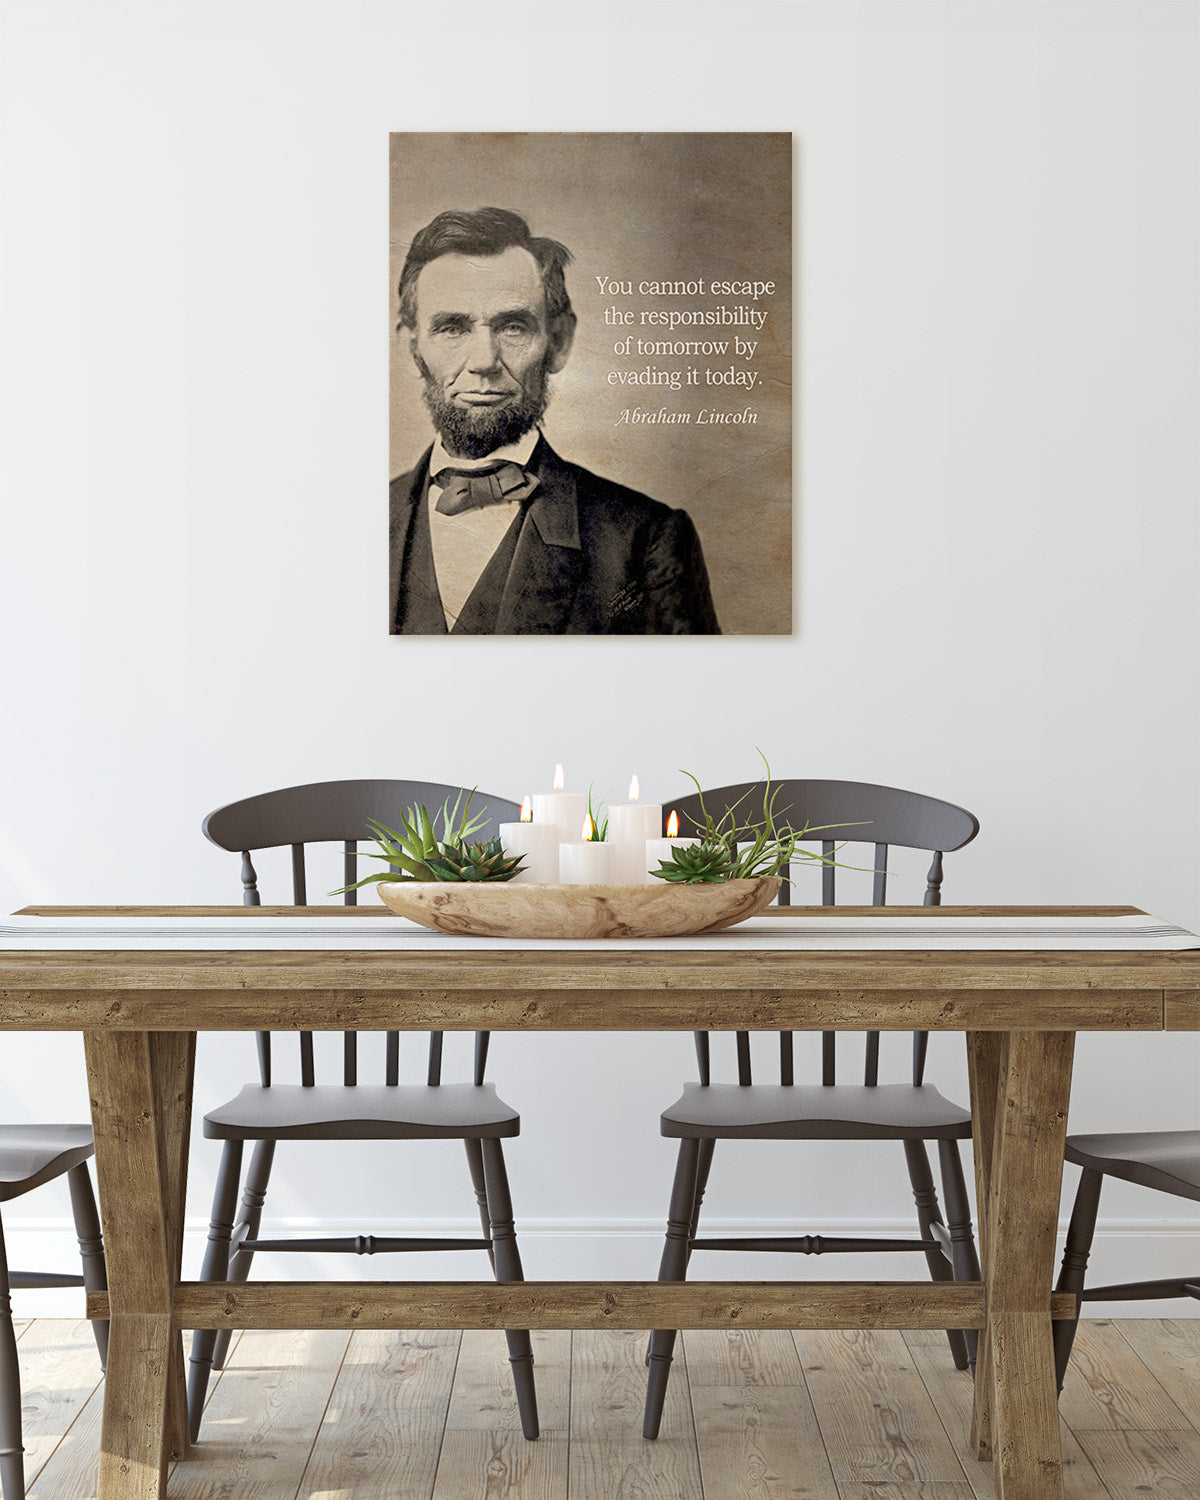 Abraham Lincoln Historic Quote - You cannot escape the responsibility - Great Inspirational Gift - Motivational Print - American Patriotic President